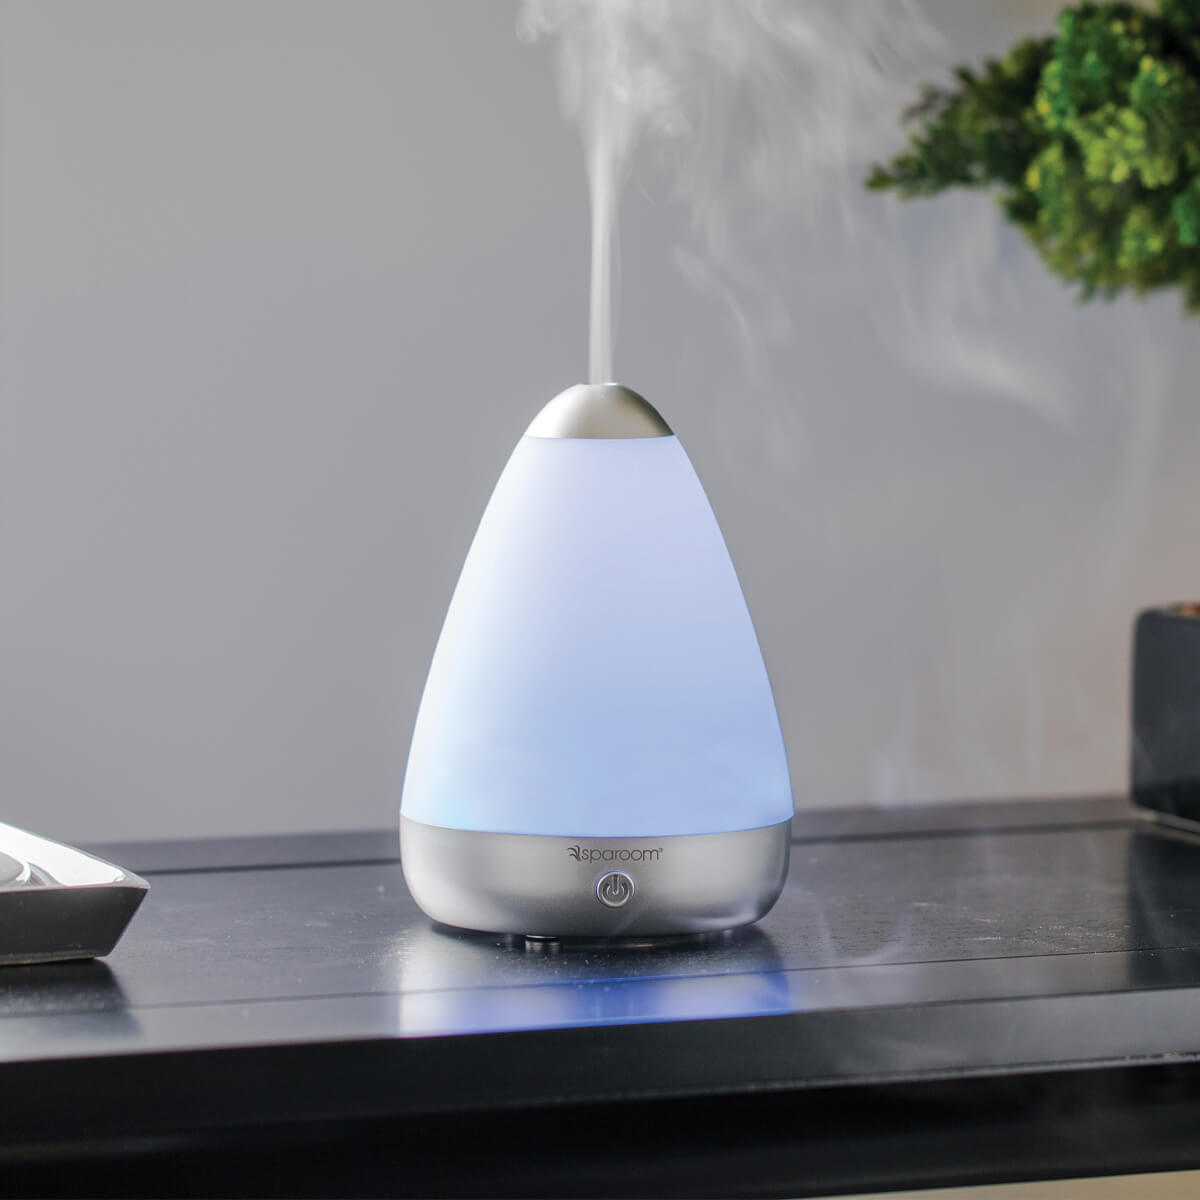 A white pear-shaped device sits on a black counter. It is streaming a mist into the air, which is floating toward the small plant sitting next to it.